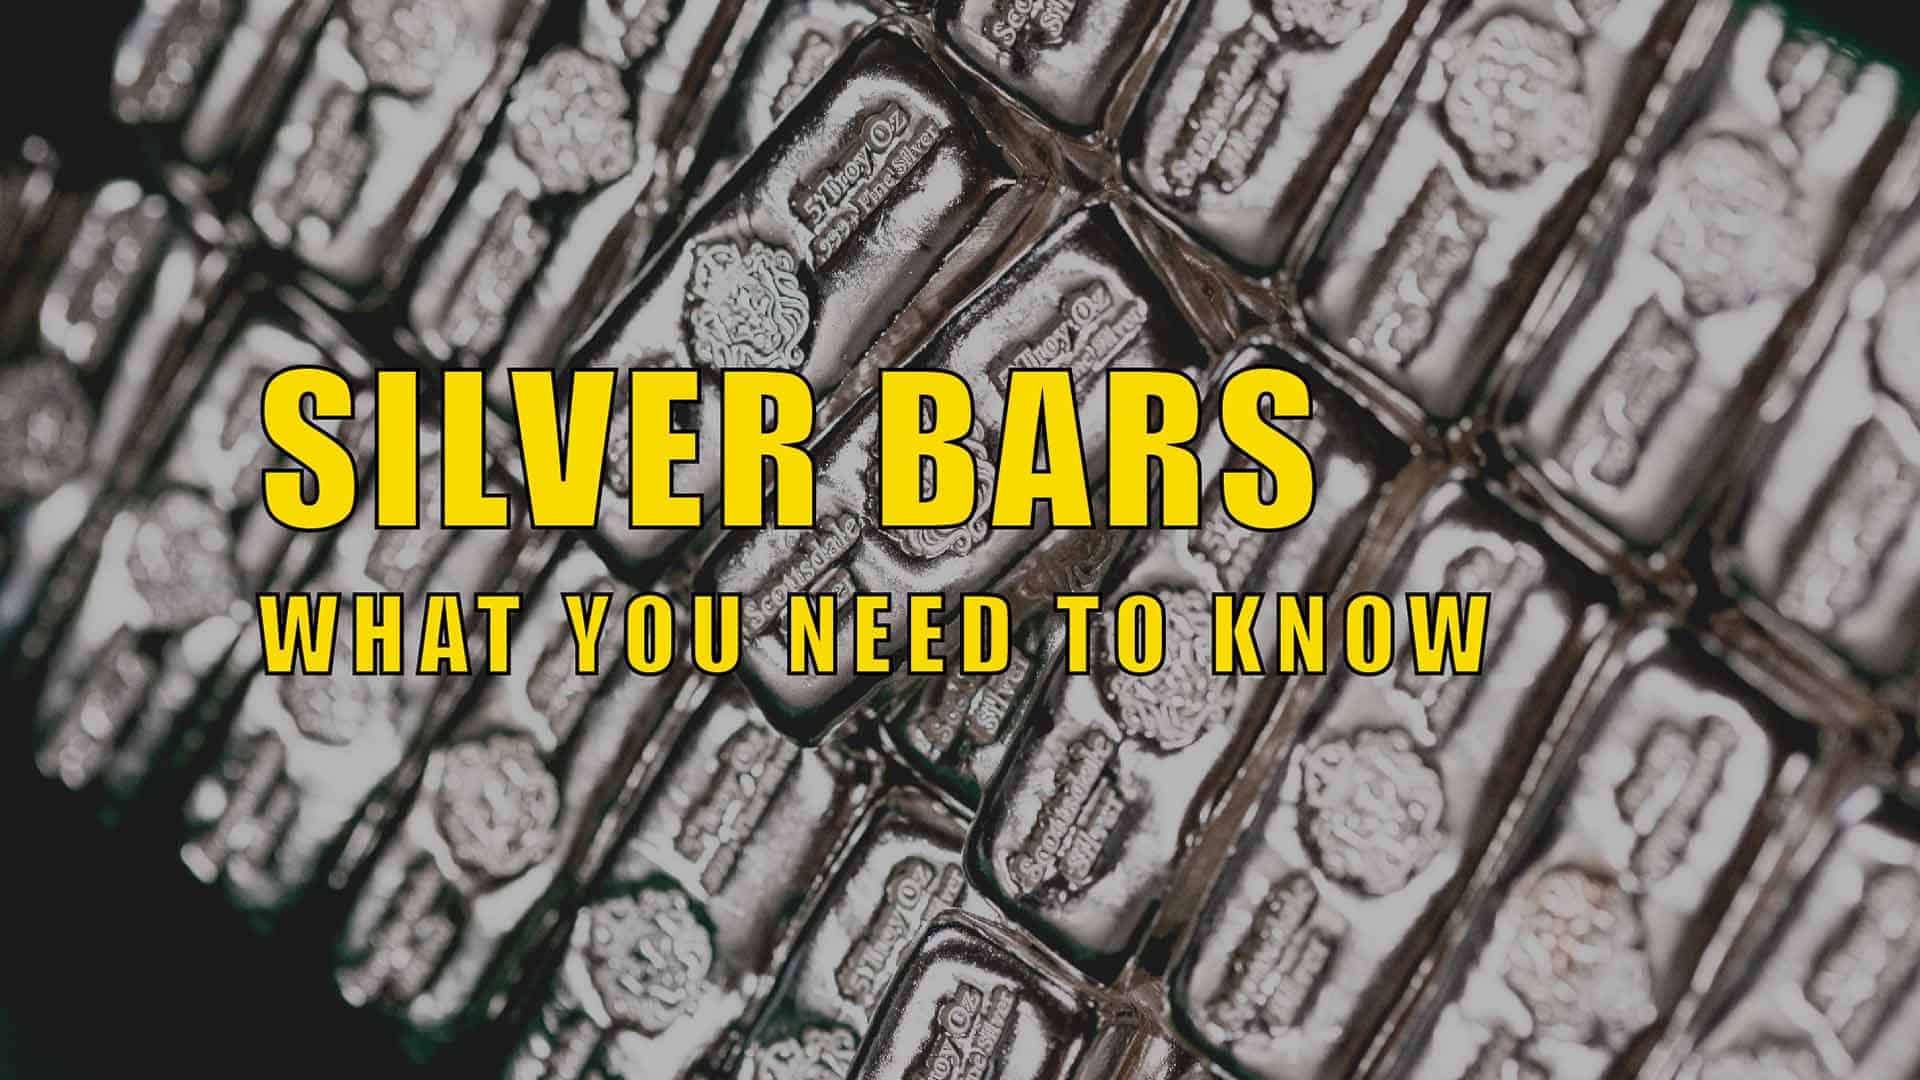 What You Need to Know about Silver Bars